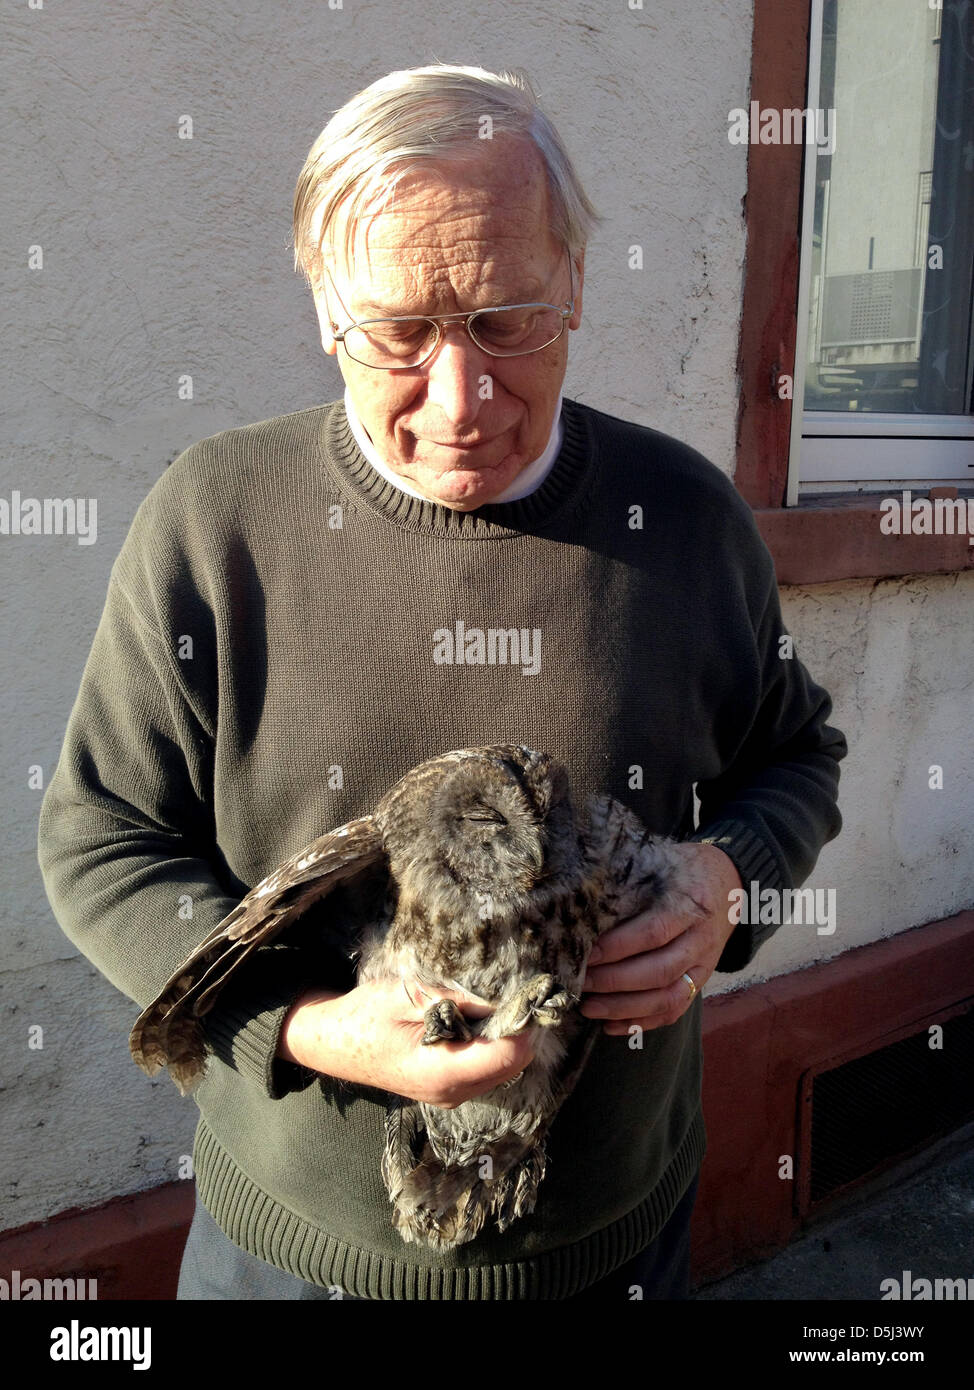 HANDOUT - A handout picture dated 13 November 2012 shows a tawny owl examined by ornithologist Dietmar Matt after it crashed into a chimney in Weinheim, Germany. According to the firebrigade, the bird fell into the chimney of an apartment house and had to be rescued. The owl suffered no harm.  Photo: Ralf Mittelbach / Firebrigade Weinheim / HANDOUT / MANDATORY CREDIT / EDITORIAL US Stock Photo